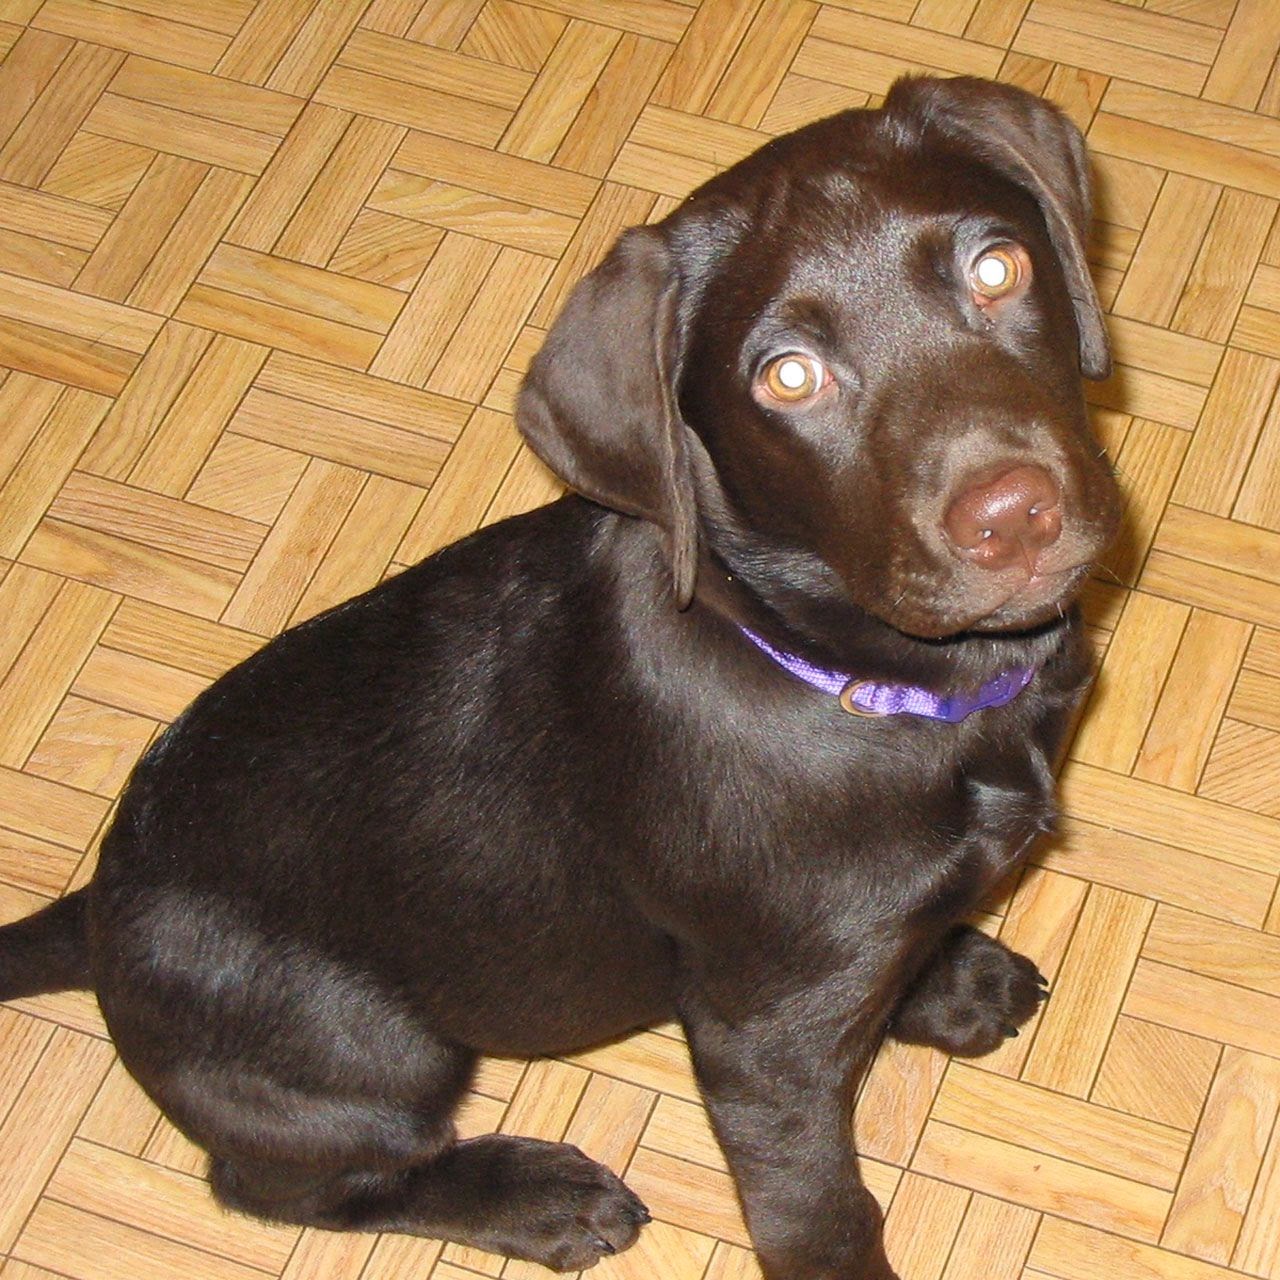 chocolate lab puppy training tips - DriverLayer Search Engine